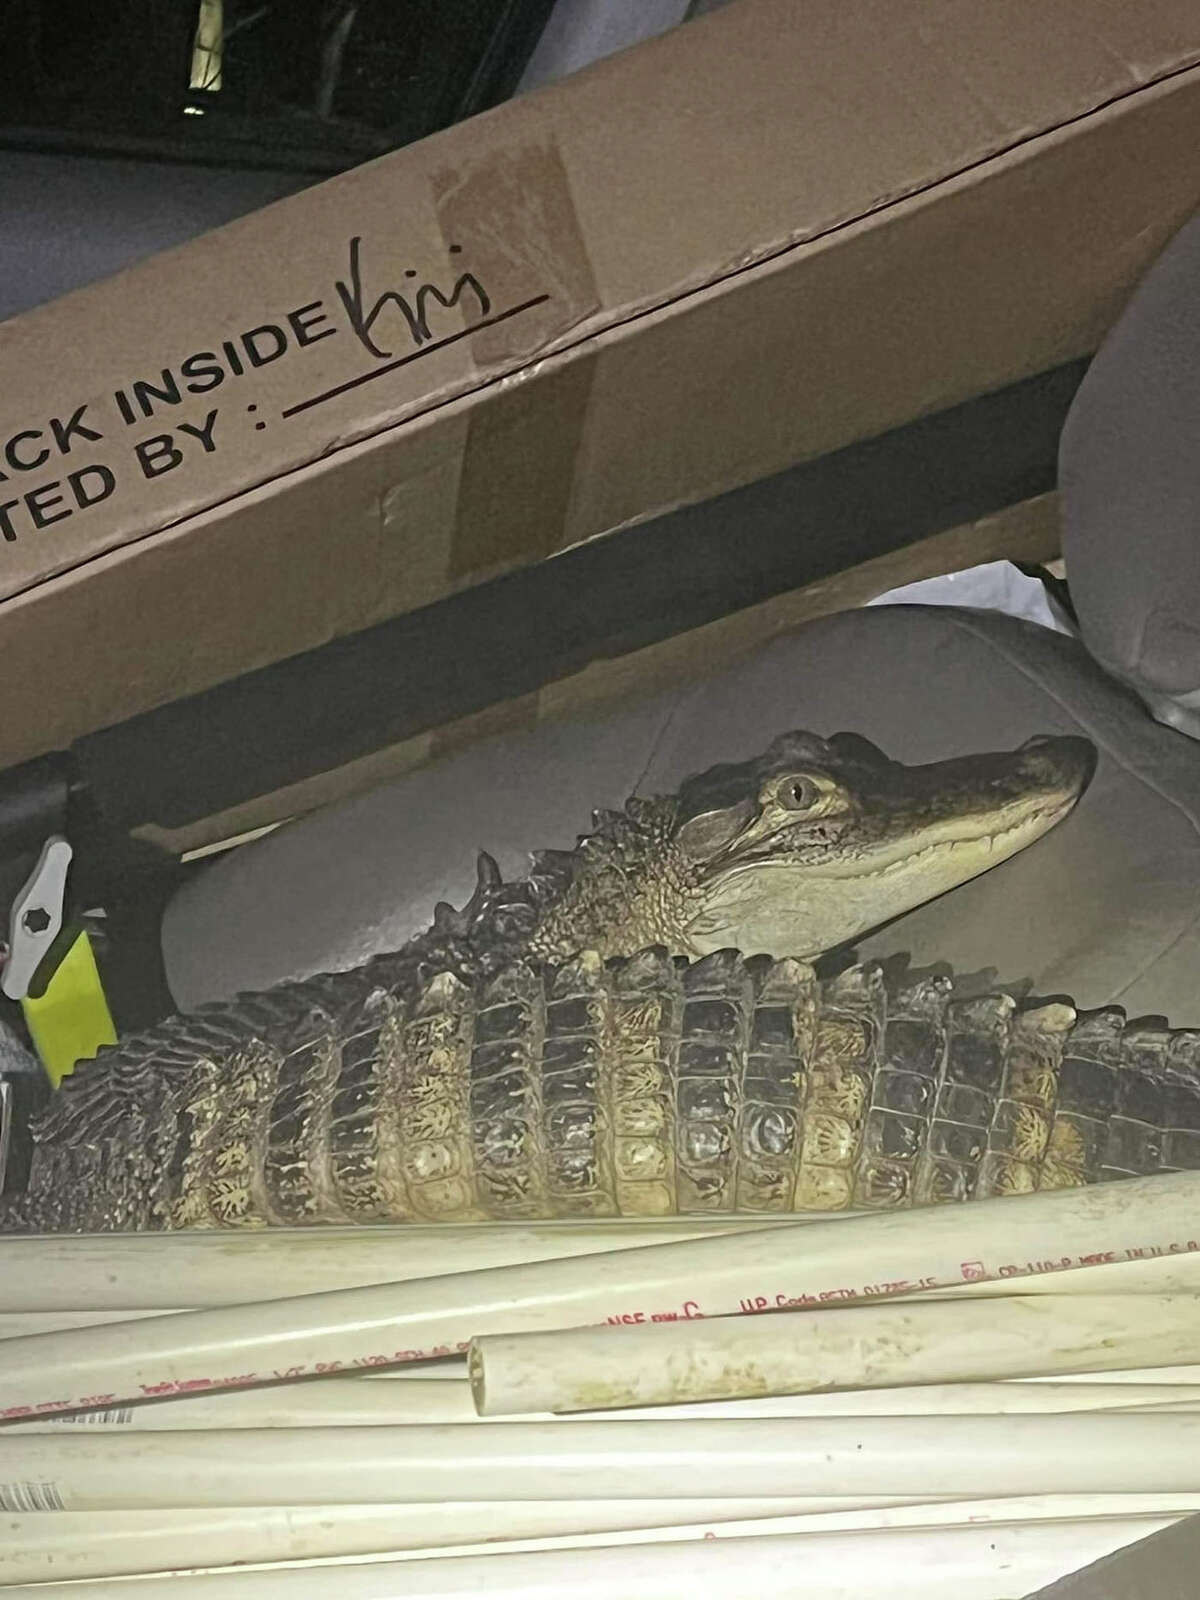 Deputies with the Lake County Sheriff's Office took "Karen," an alligator, into custody stopping a vehicle on U.S. 10.